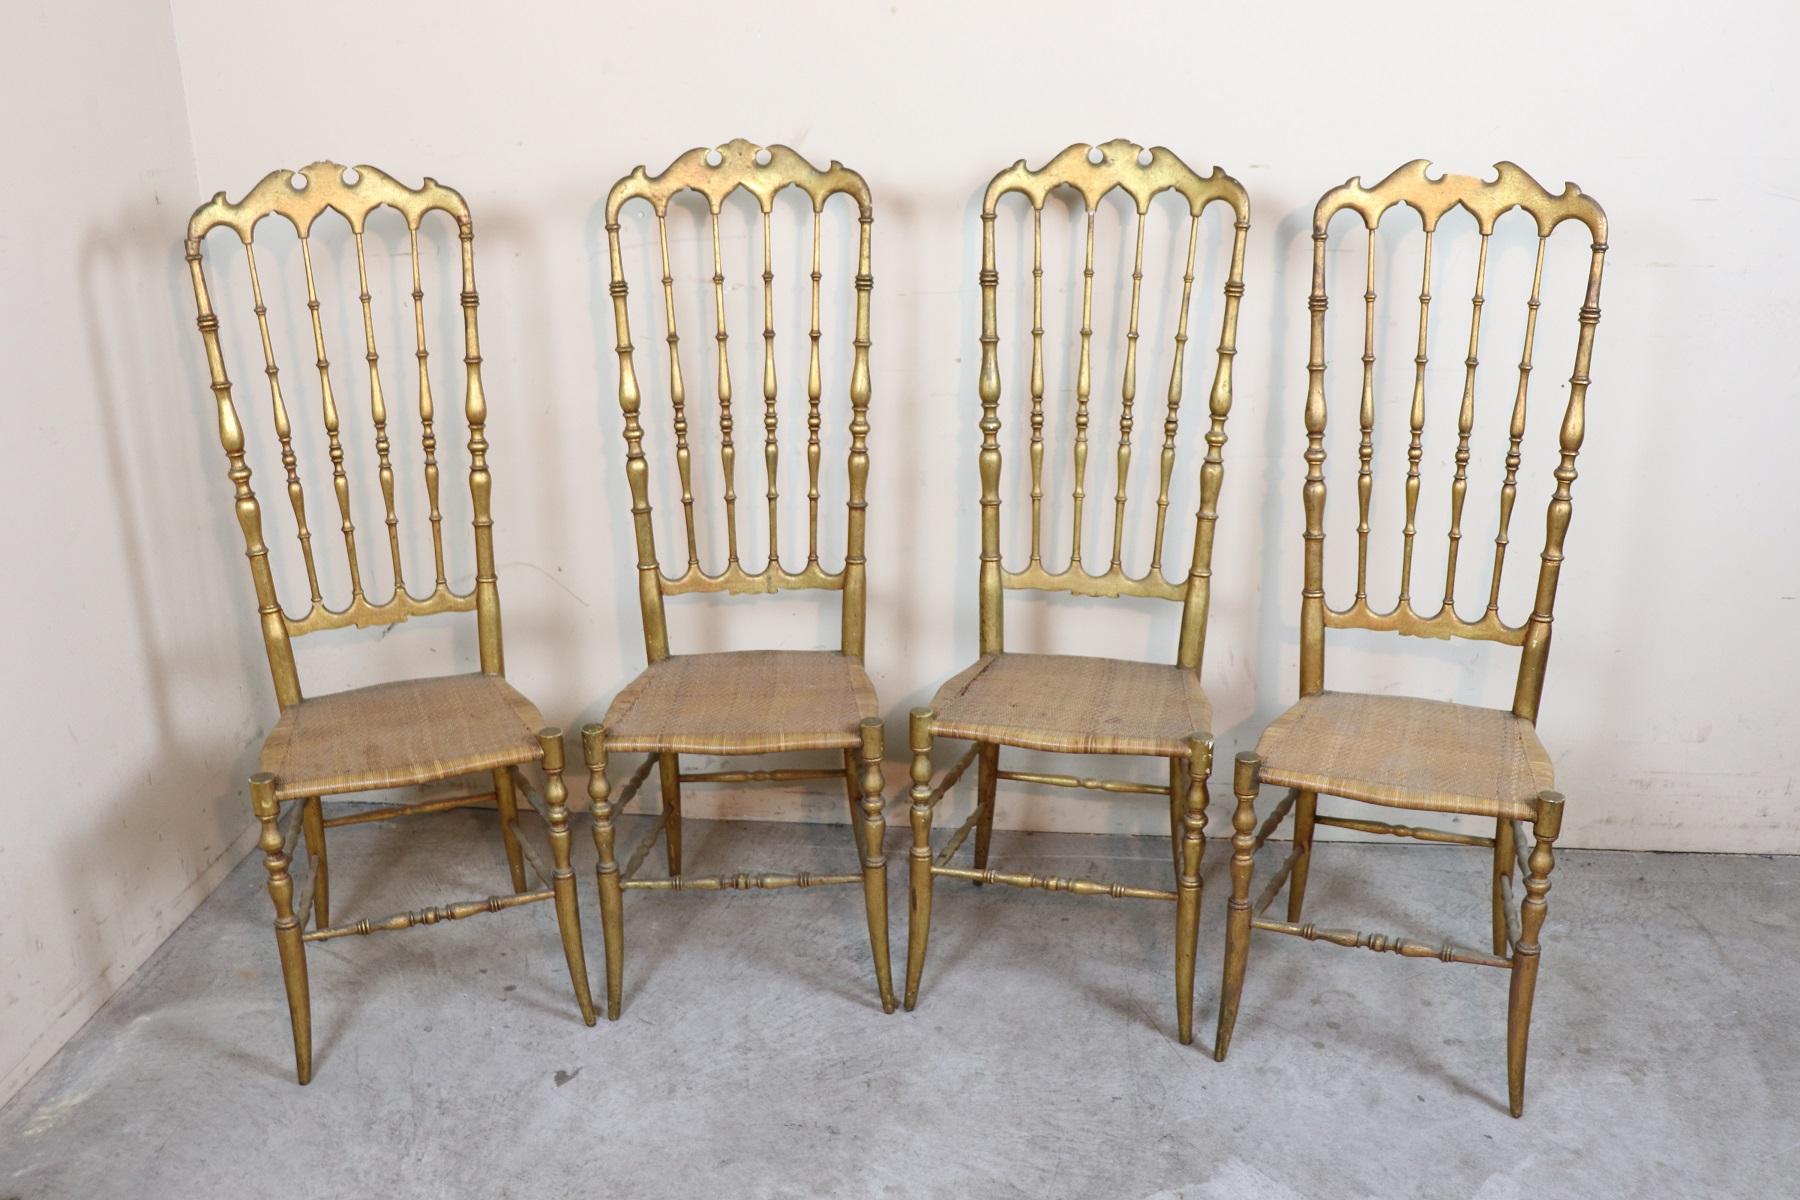 Very rare series of four chairs model Parigina production of Chiavari Italy cabinetmakers laboratories. All the golden chairs you see on sale are in brass but these chairs are antique 1890s made of turned wood and then gilded with gold leaf. The